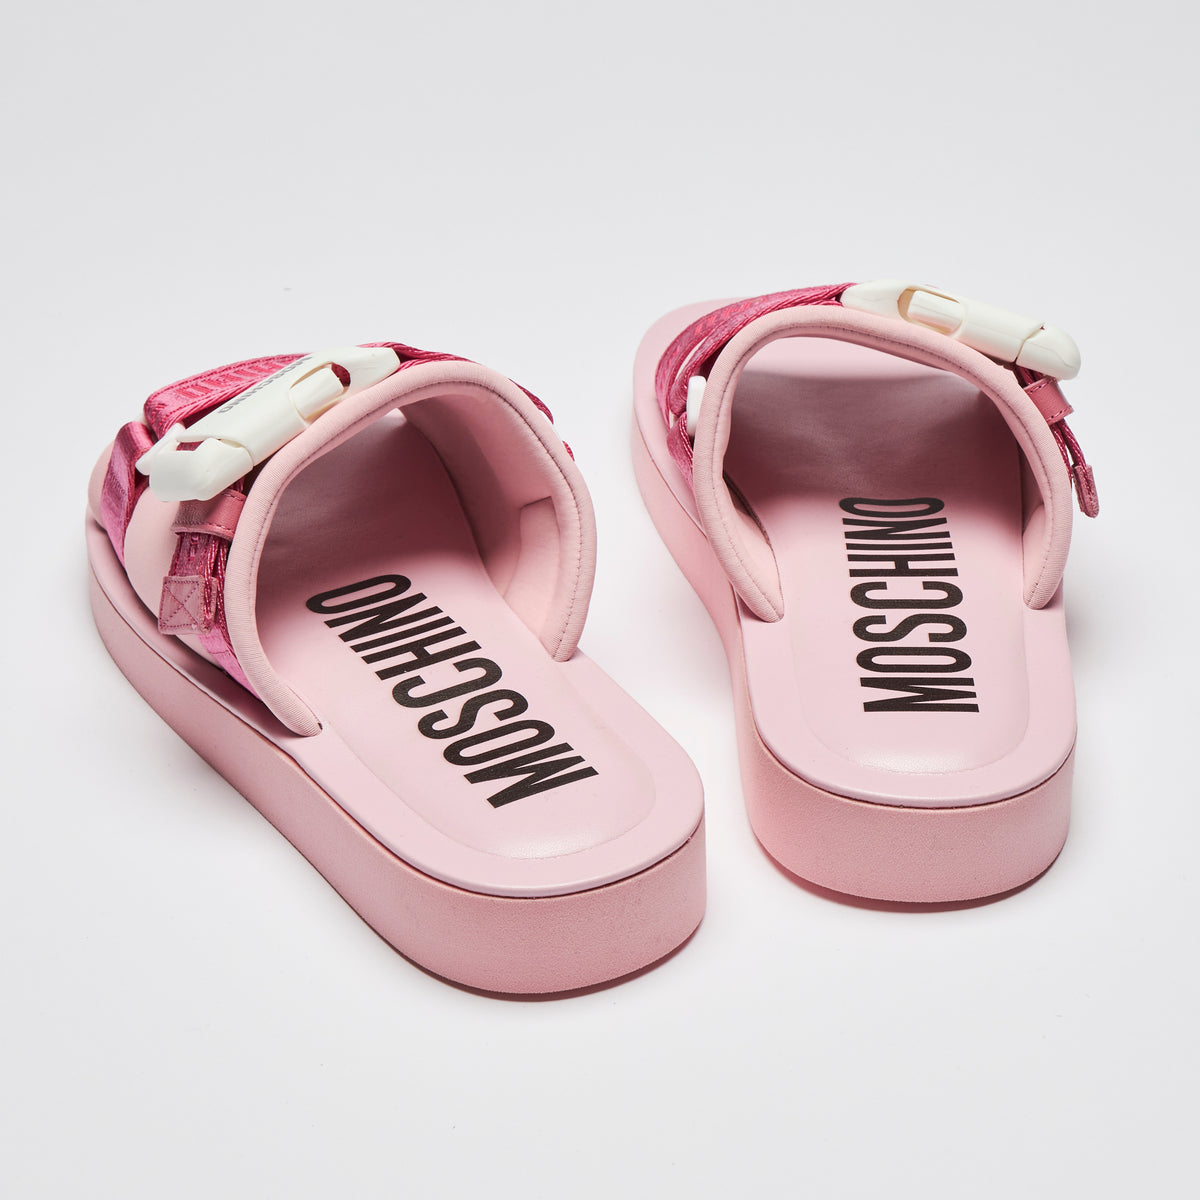 Excellent Pre-Loved Pink Slides with White Buckle Detail and Pink Ribbon Logo Strap. (back)